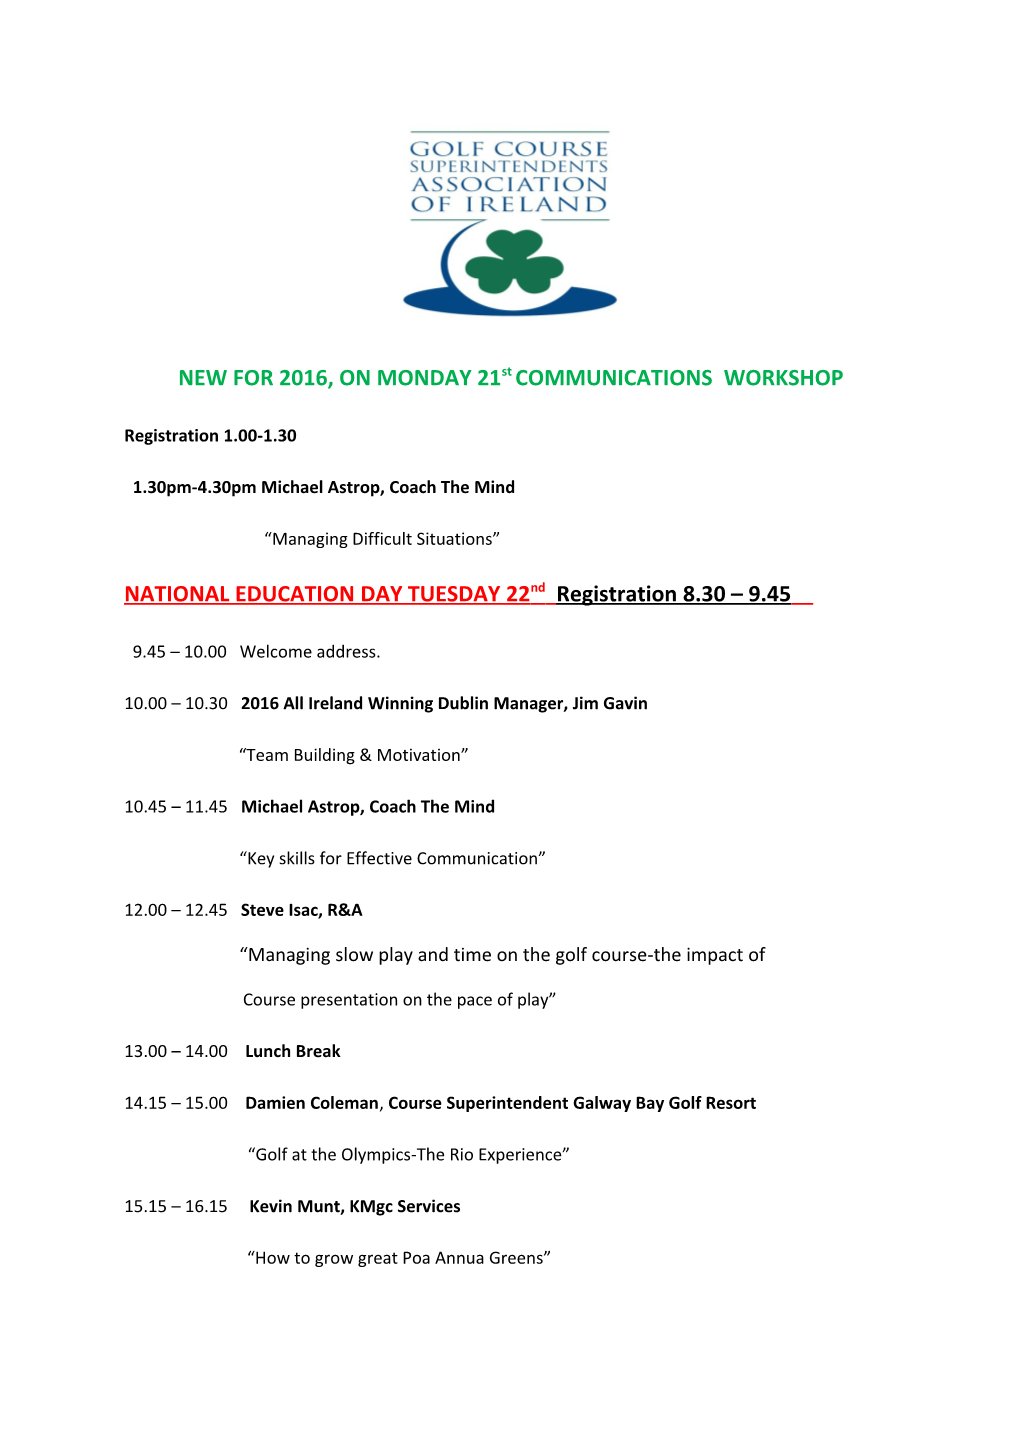 NEW for 2016, on MONDAY 21St COMMUNICATIONS WORKSHOP